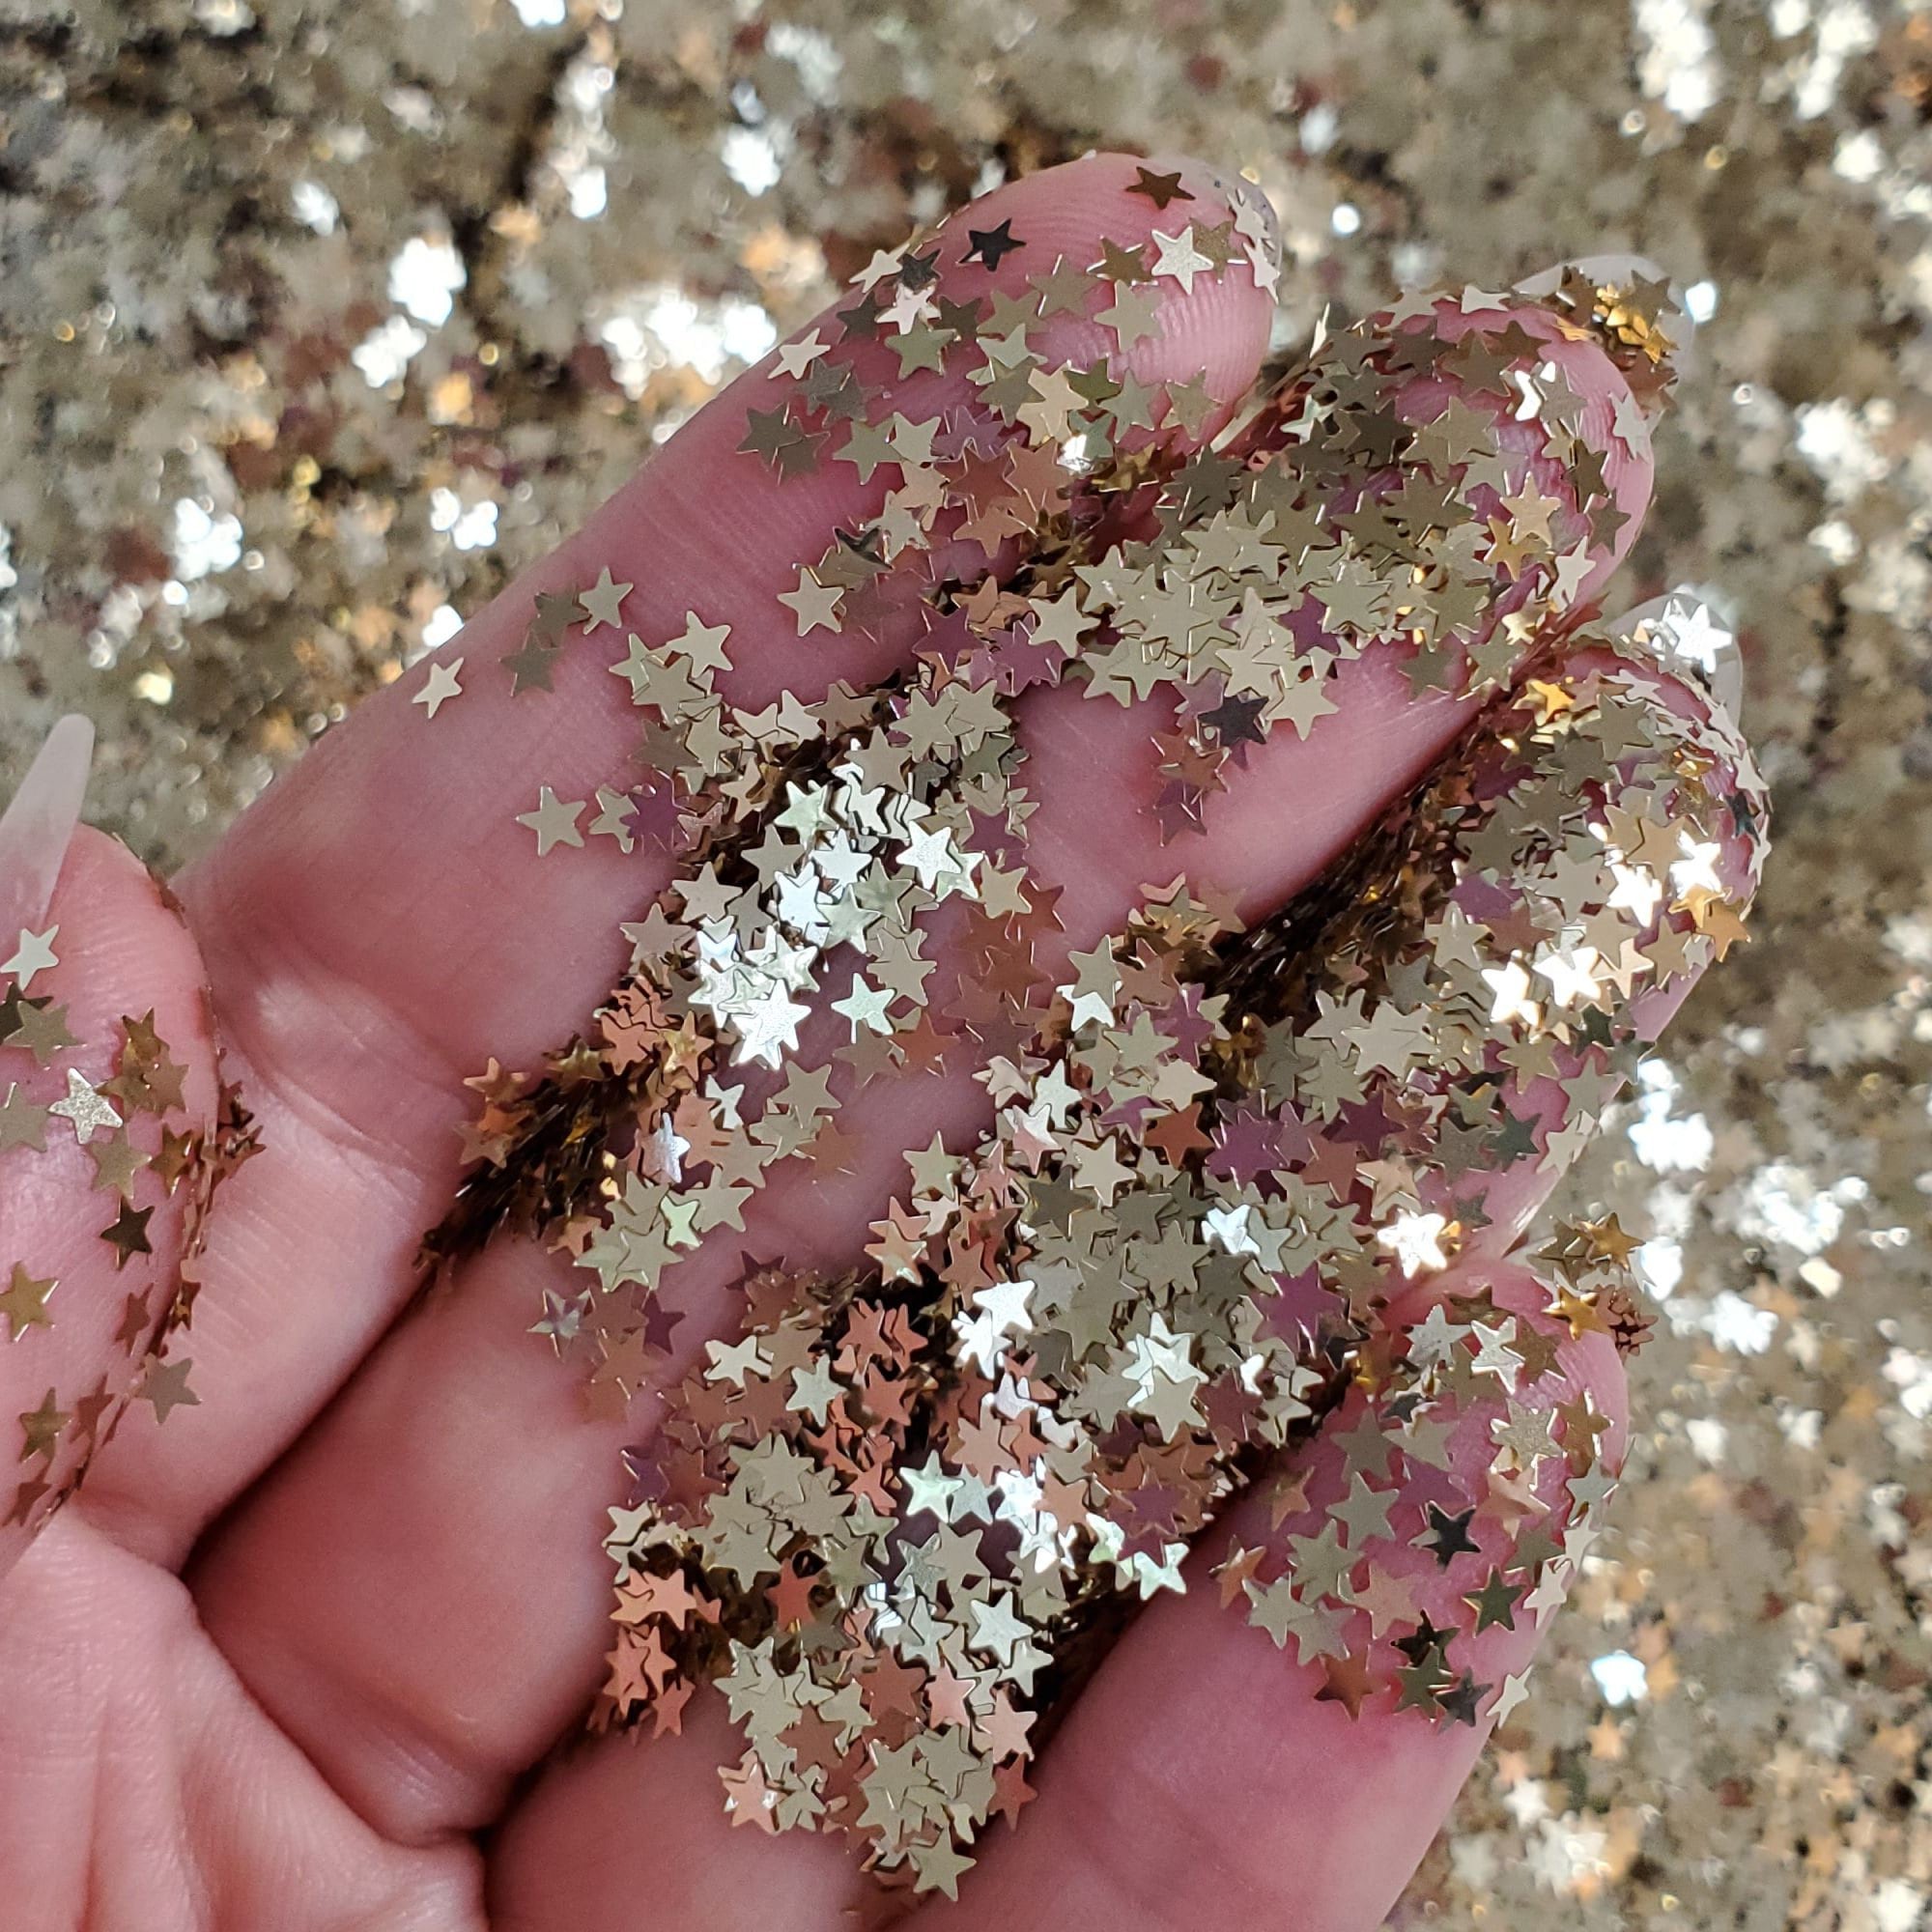 The Lost Ark Extra Chunky Gold Holographic Biodegradable Glitter